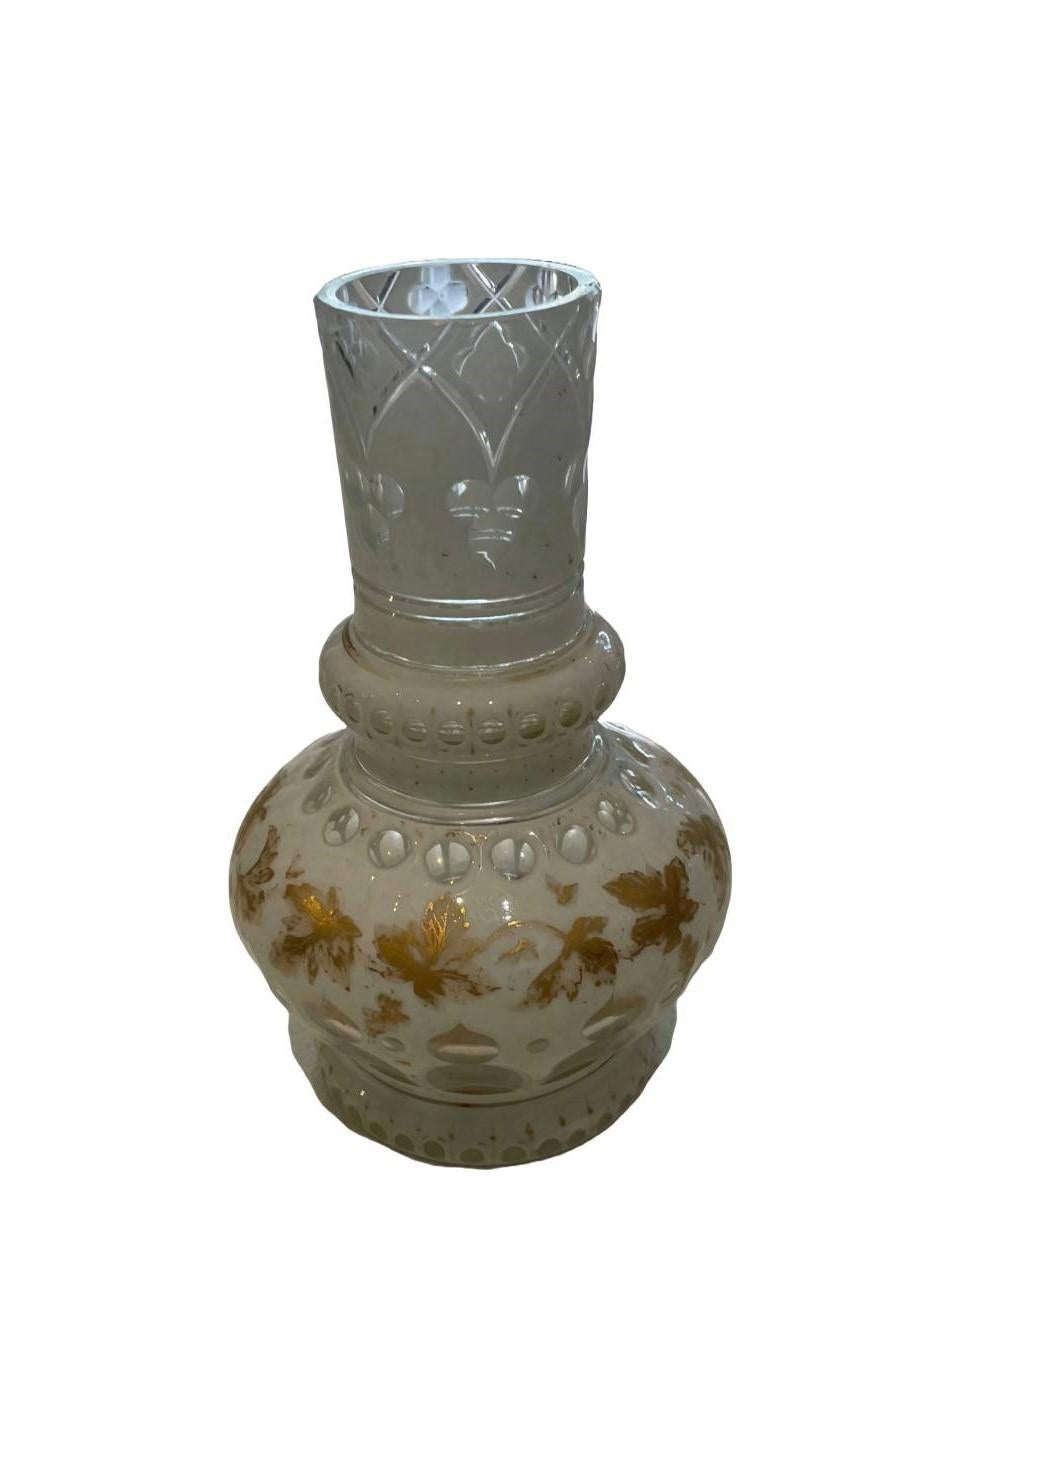 Antique 19th Century Bohemian White and Gold Overlay Glassware Vase In Good Condition For Sale In West Palm Beach, FL